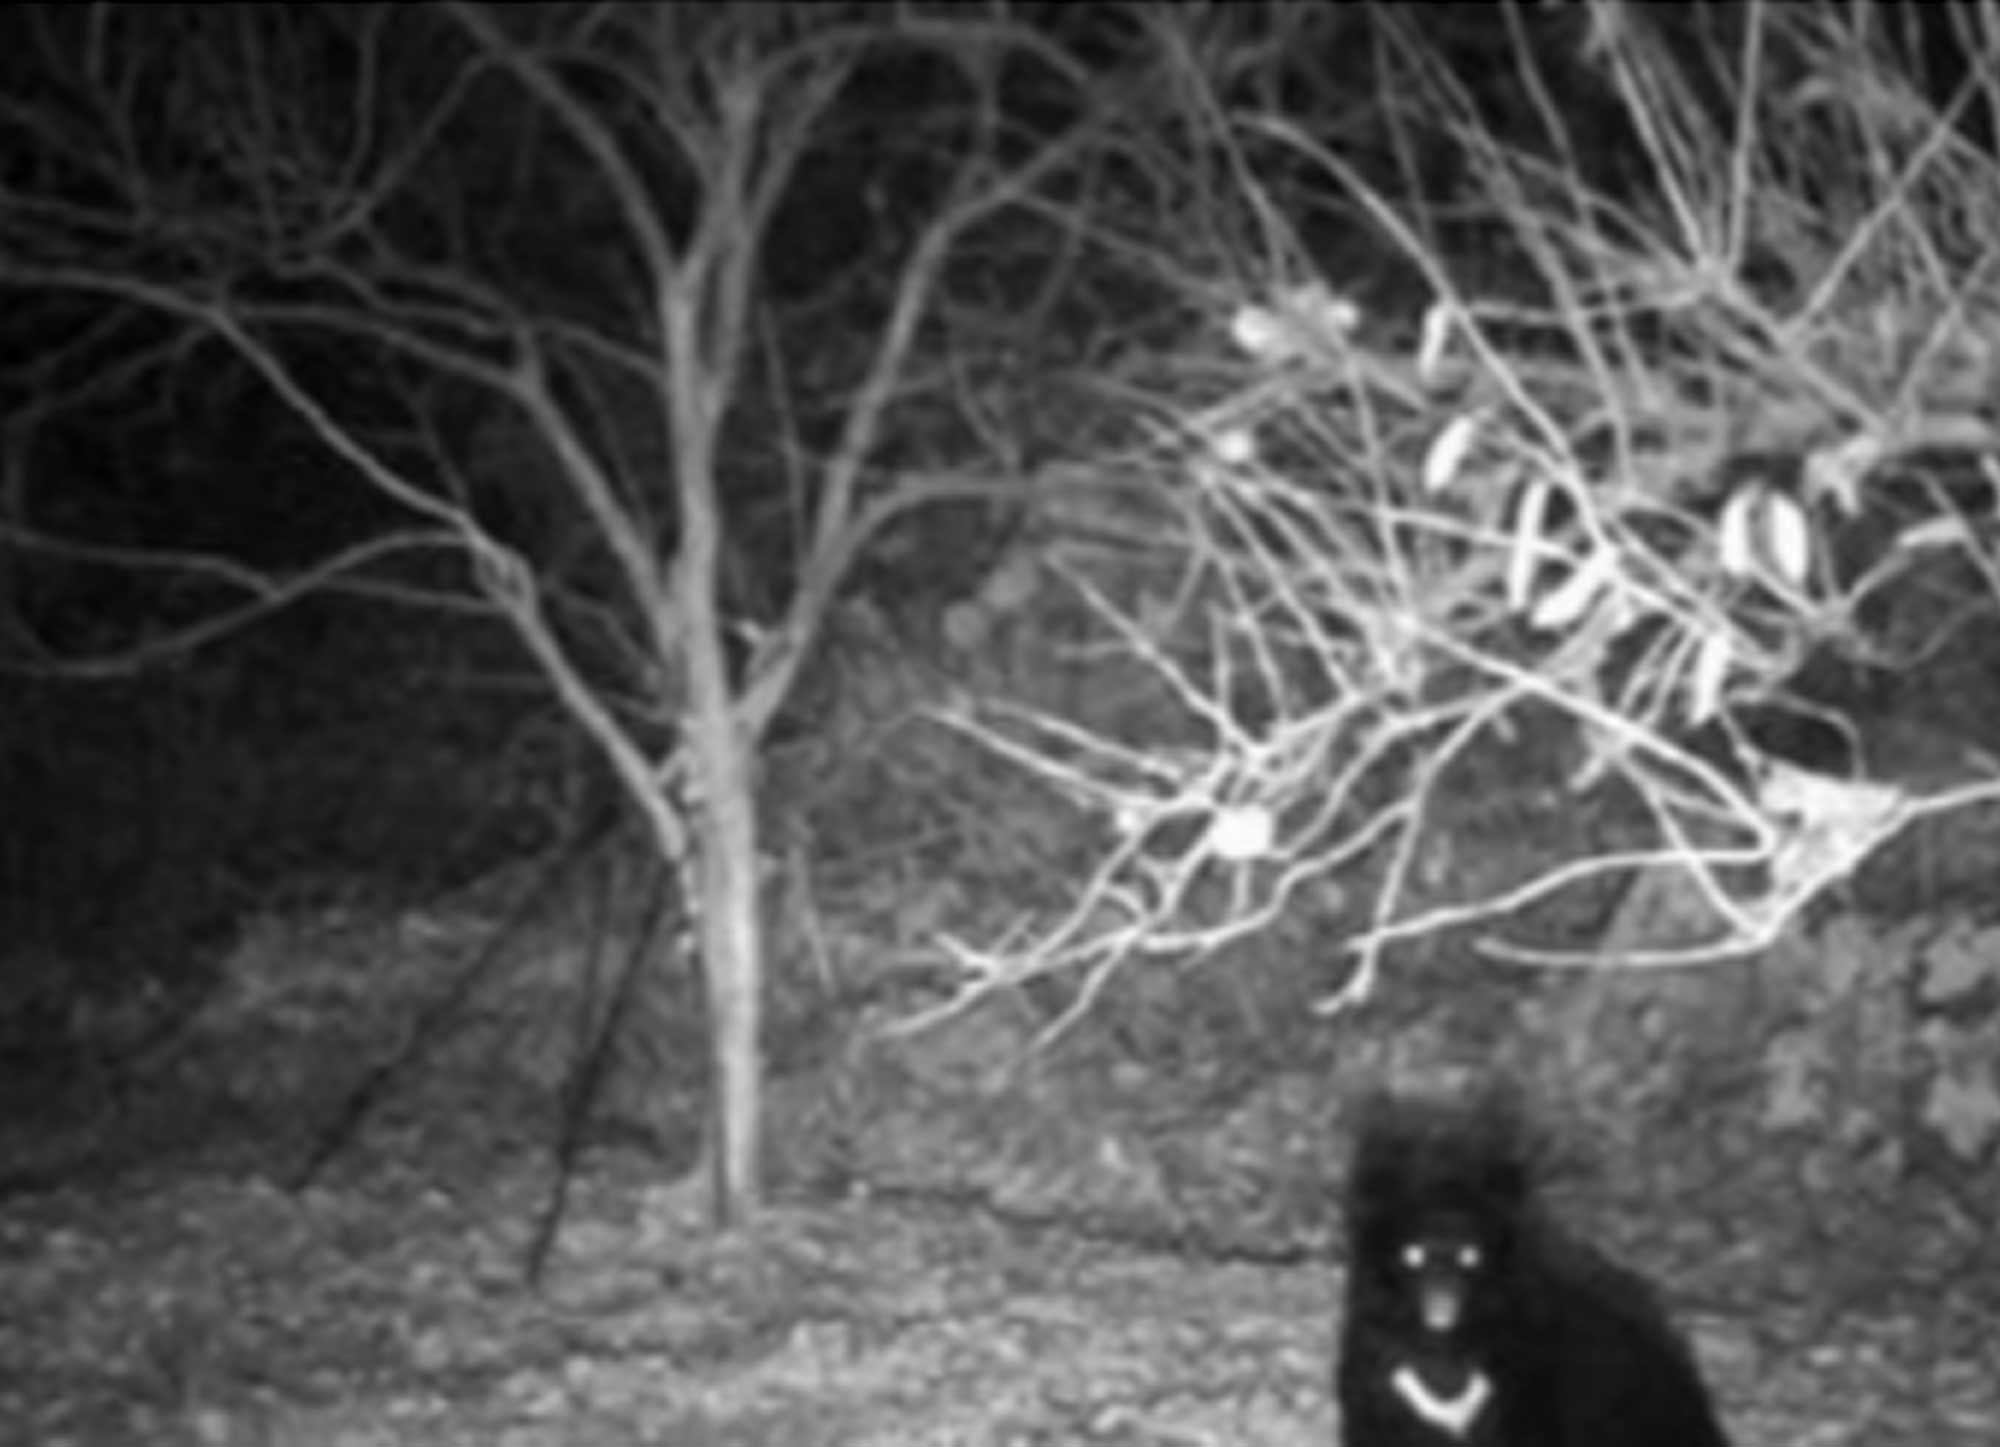 Some of the videos taken by the trail camera